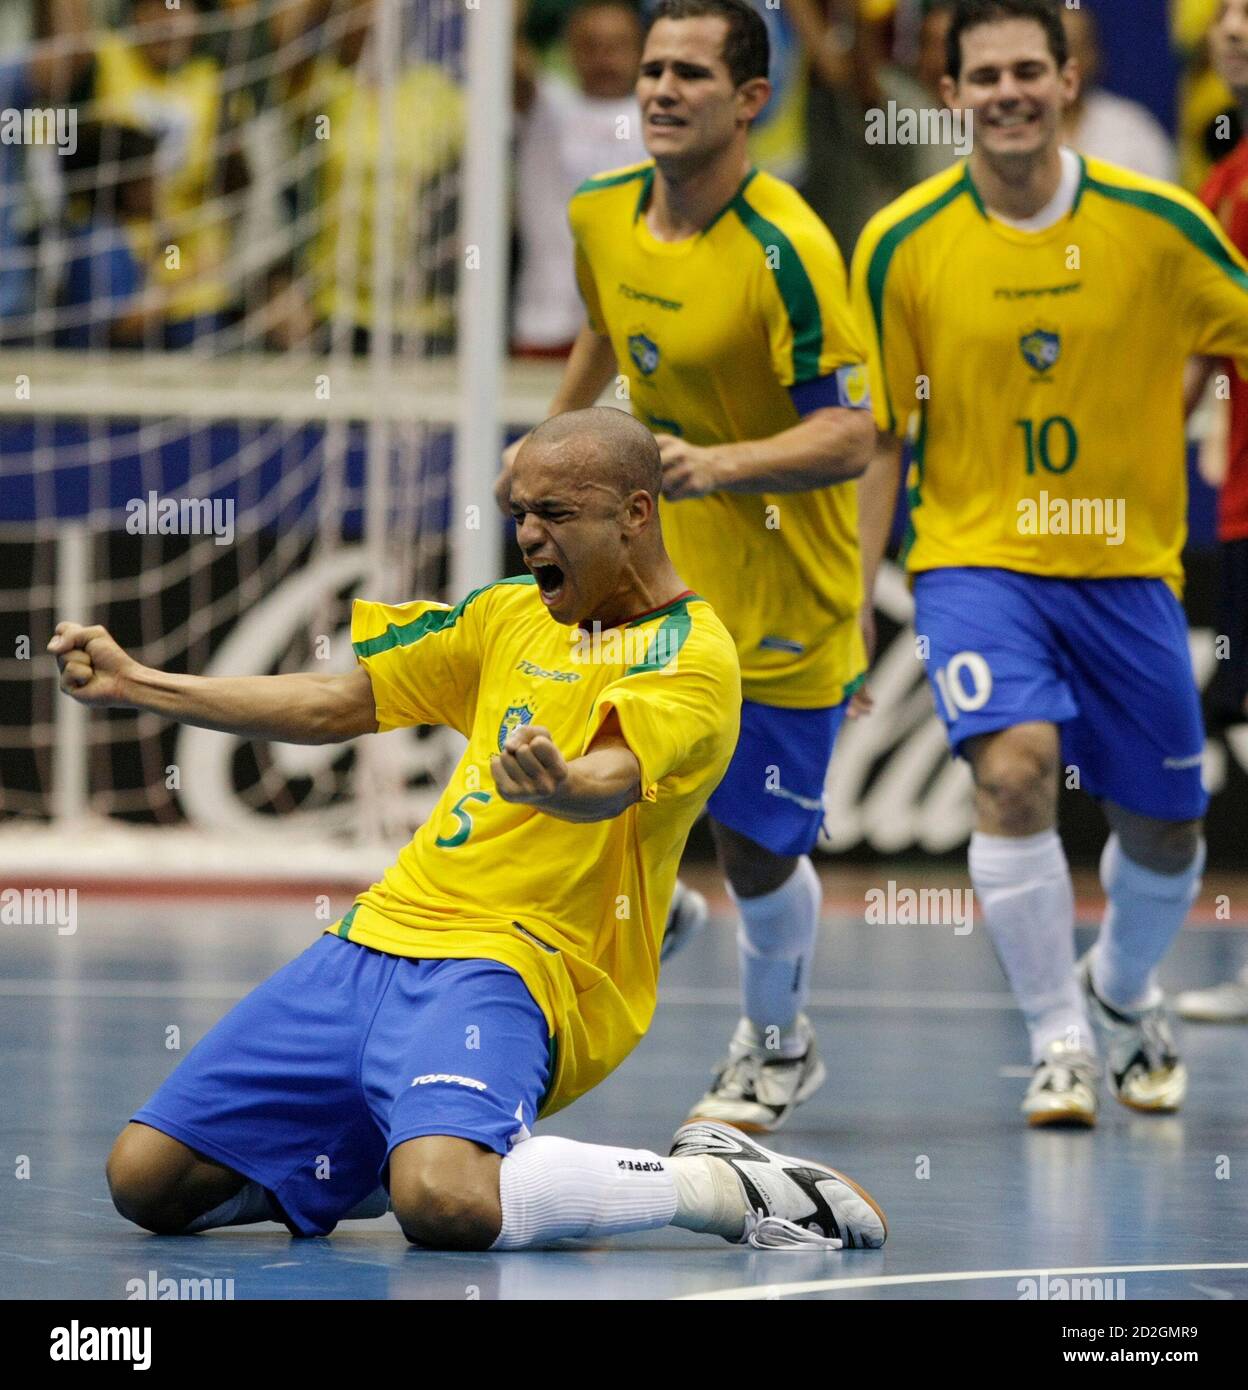 Cico (L) of Brazil celebrates his teammate Vinicius' (C) goal against Spain as Brazil's Lenisio reacts during their FIFA Futsal World Cup final soccer match at the Gimnasio Maracanazinho in Rio de Janeiro October 19, 2008. REUTERS/Sergio Moraes  (BRAZIL) Stock Photo